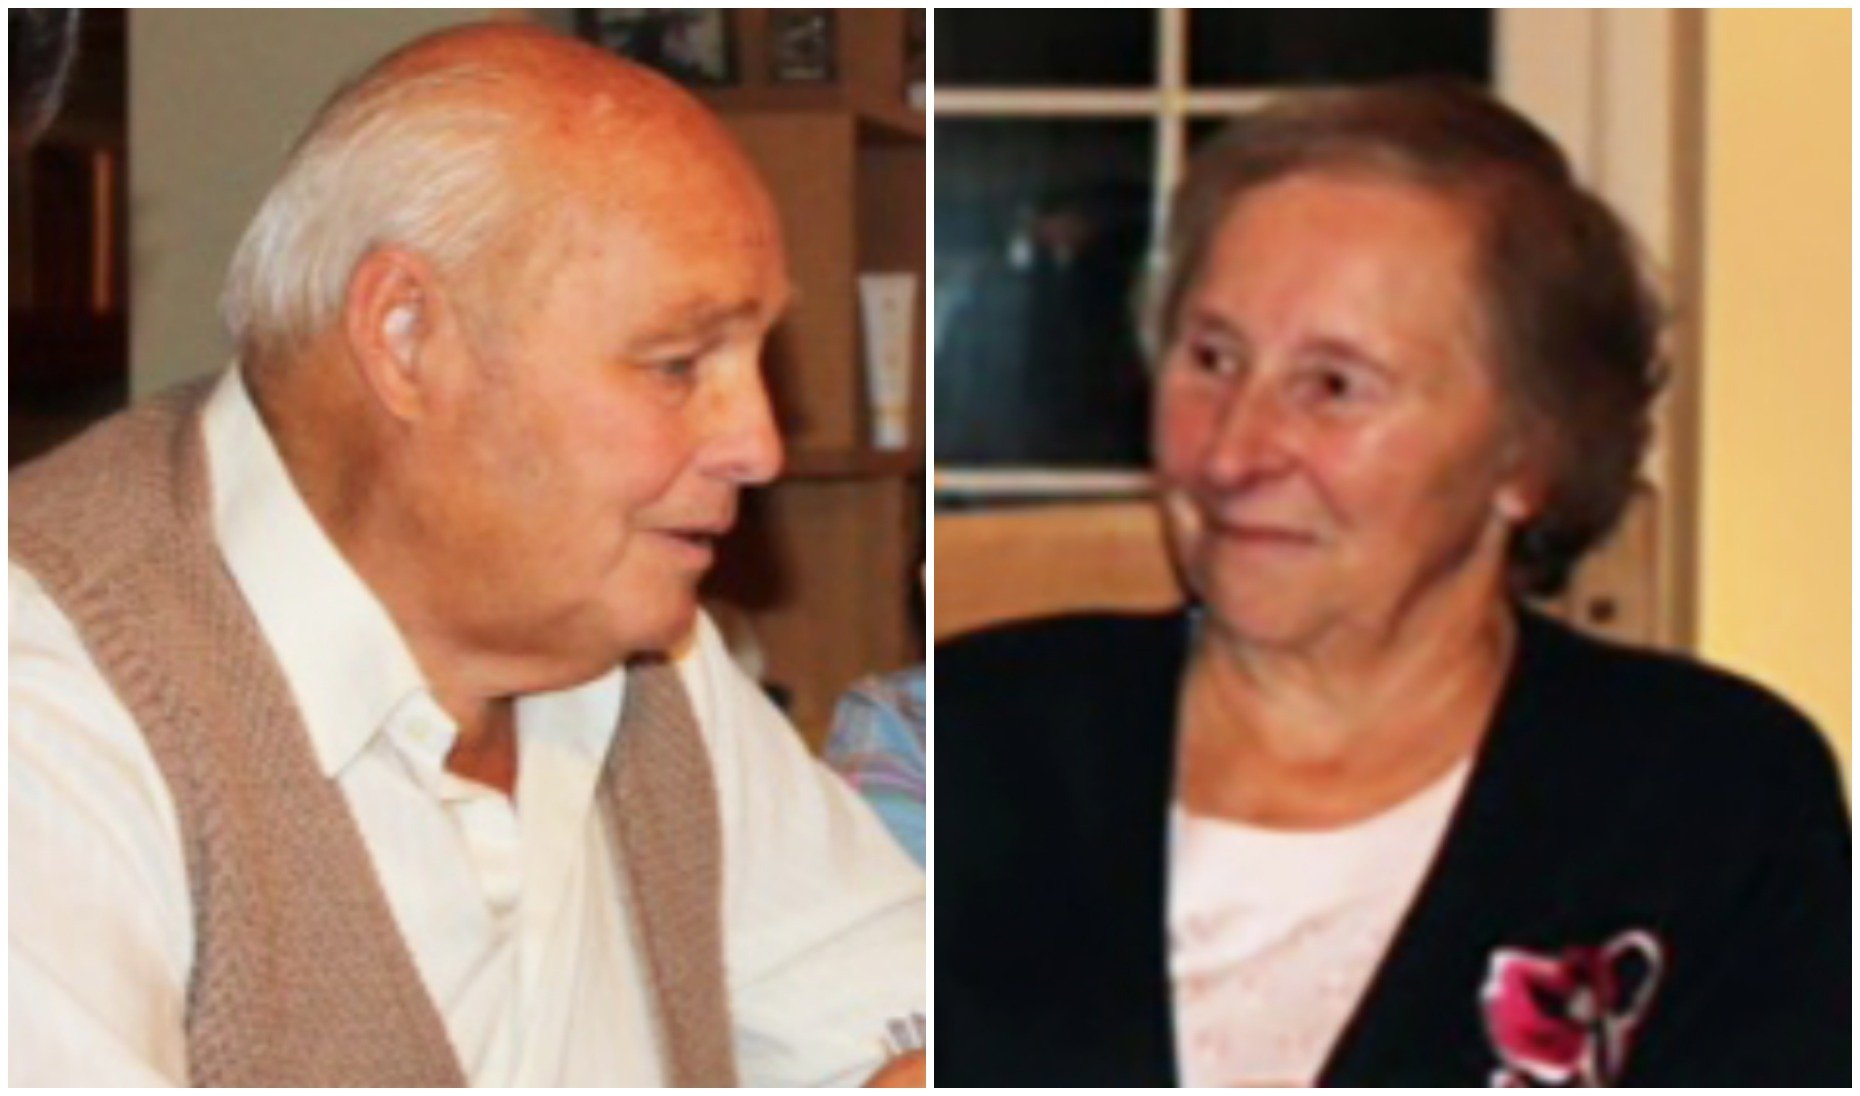 Brian and Ruth Dickinson, aged 82 and 77, died after a crash on the B1188 Sleaford Road in Metheringham in January 2016.